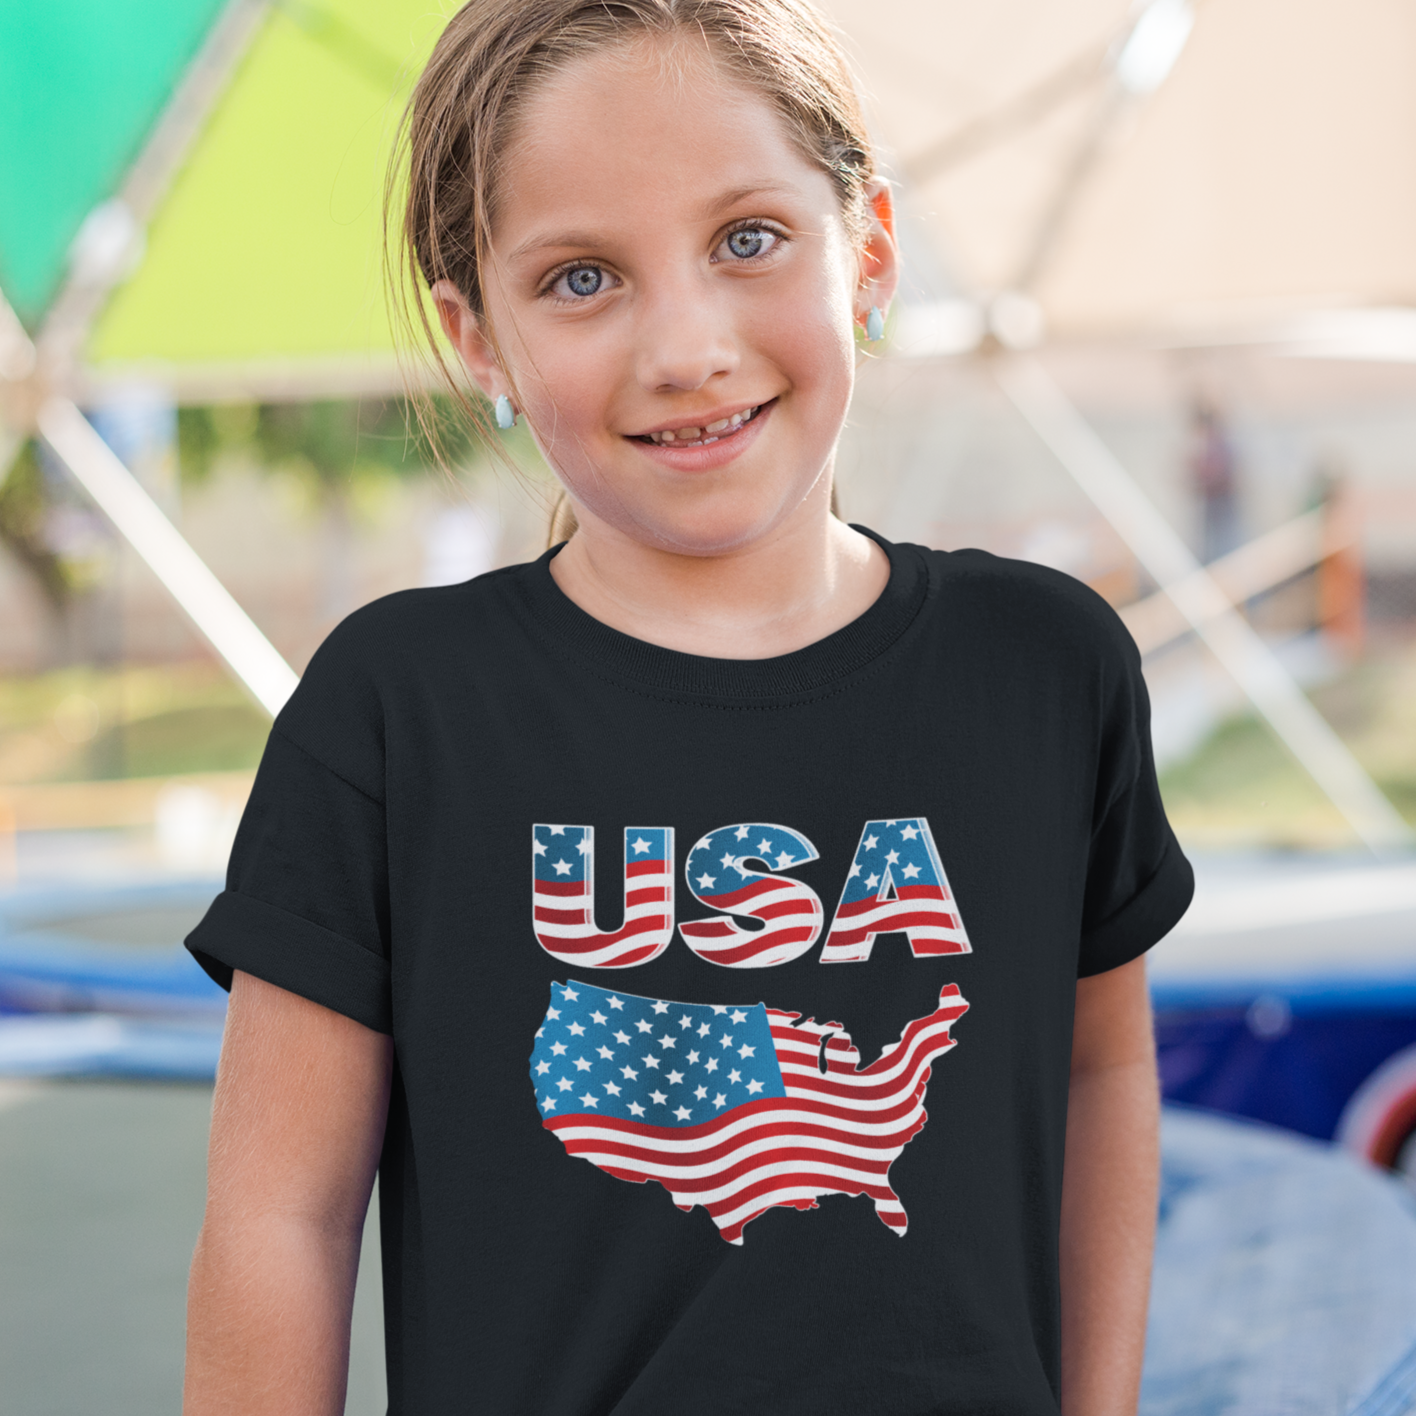 Fire Fit Designs 4th of July Shirts for Girls USA Shirt American Flag Shirt for Kids Patriotic Shirts for Girls - 4th of July Tee Shirt